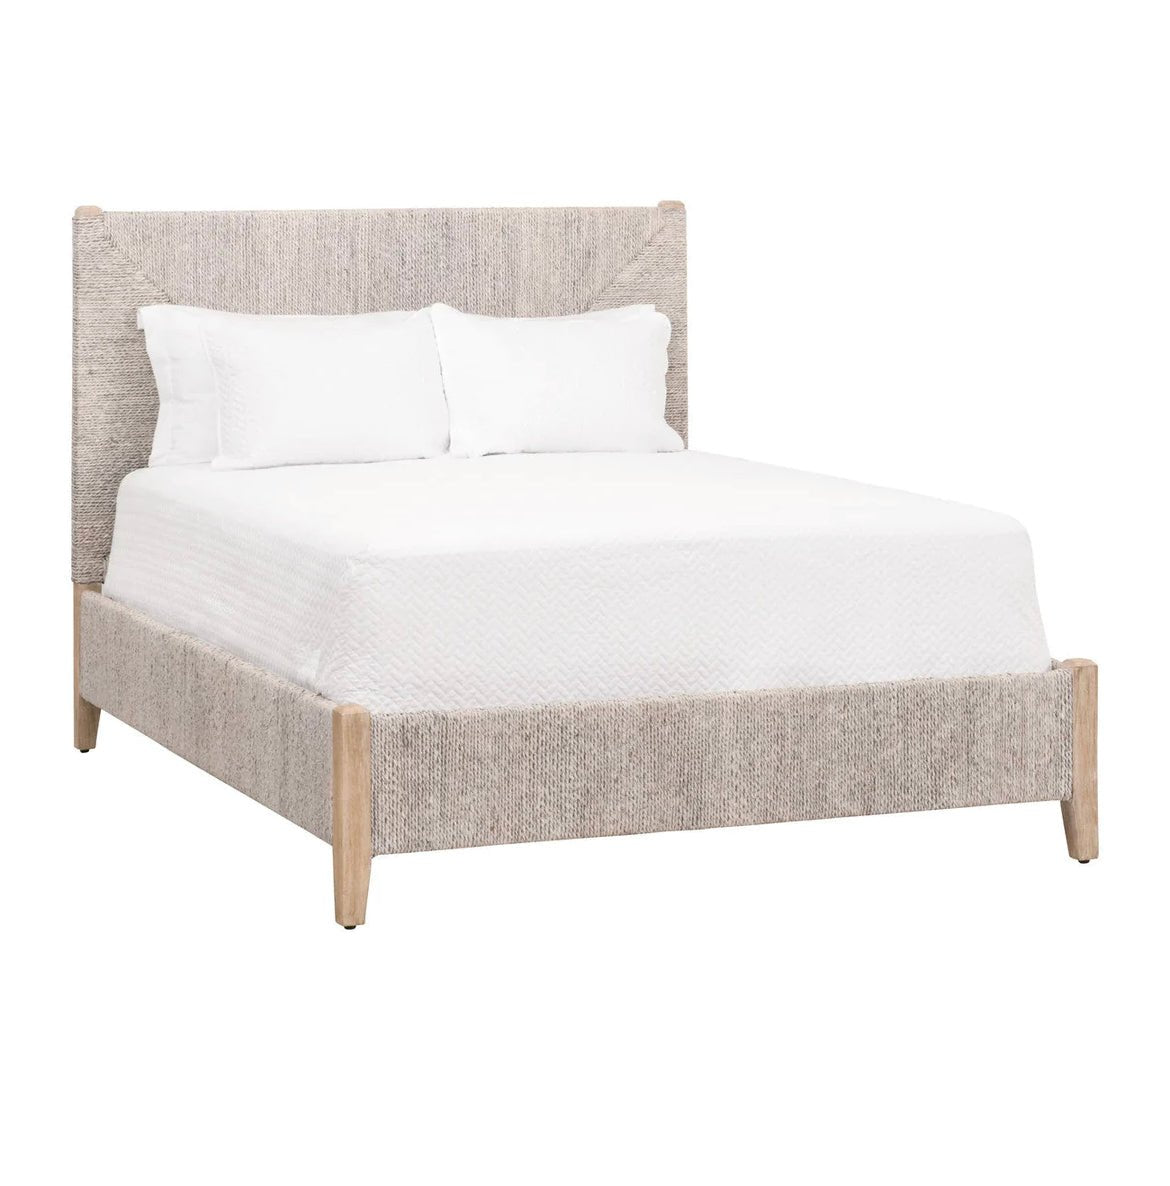 ‘Malay’ Bed (Queen) - EcoLuxe Furnishings